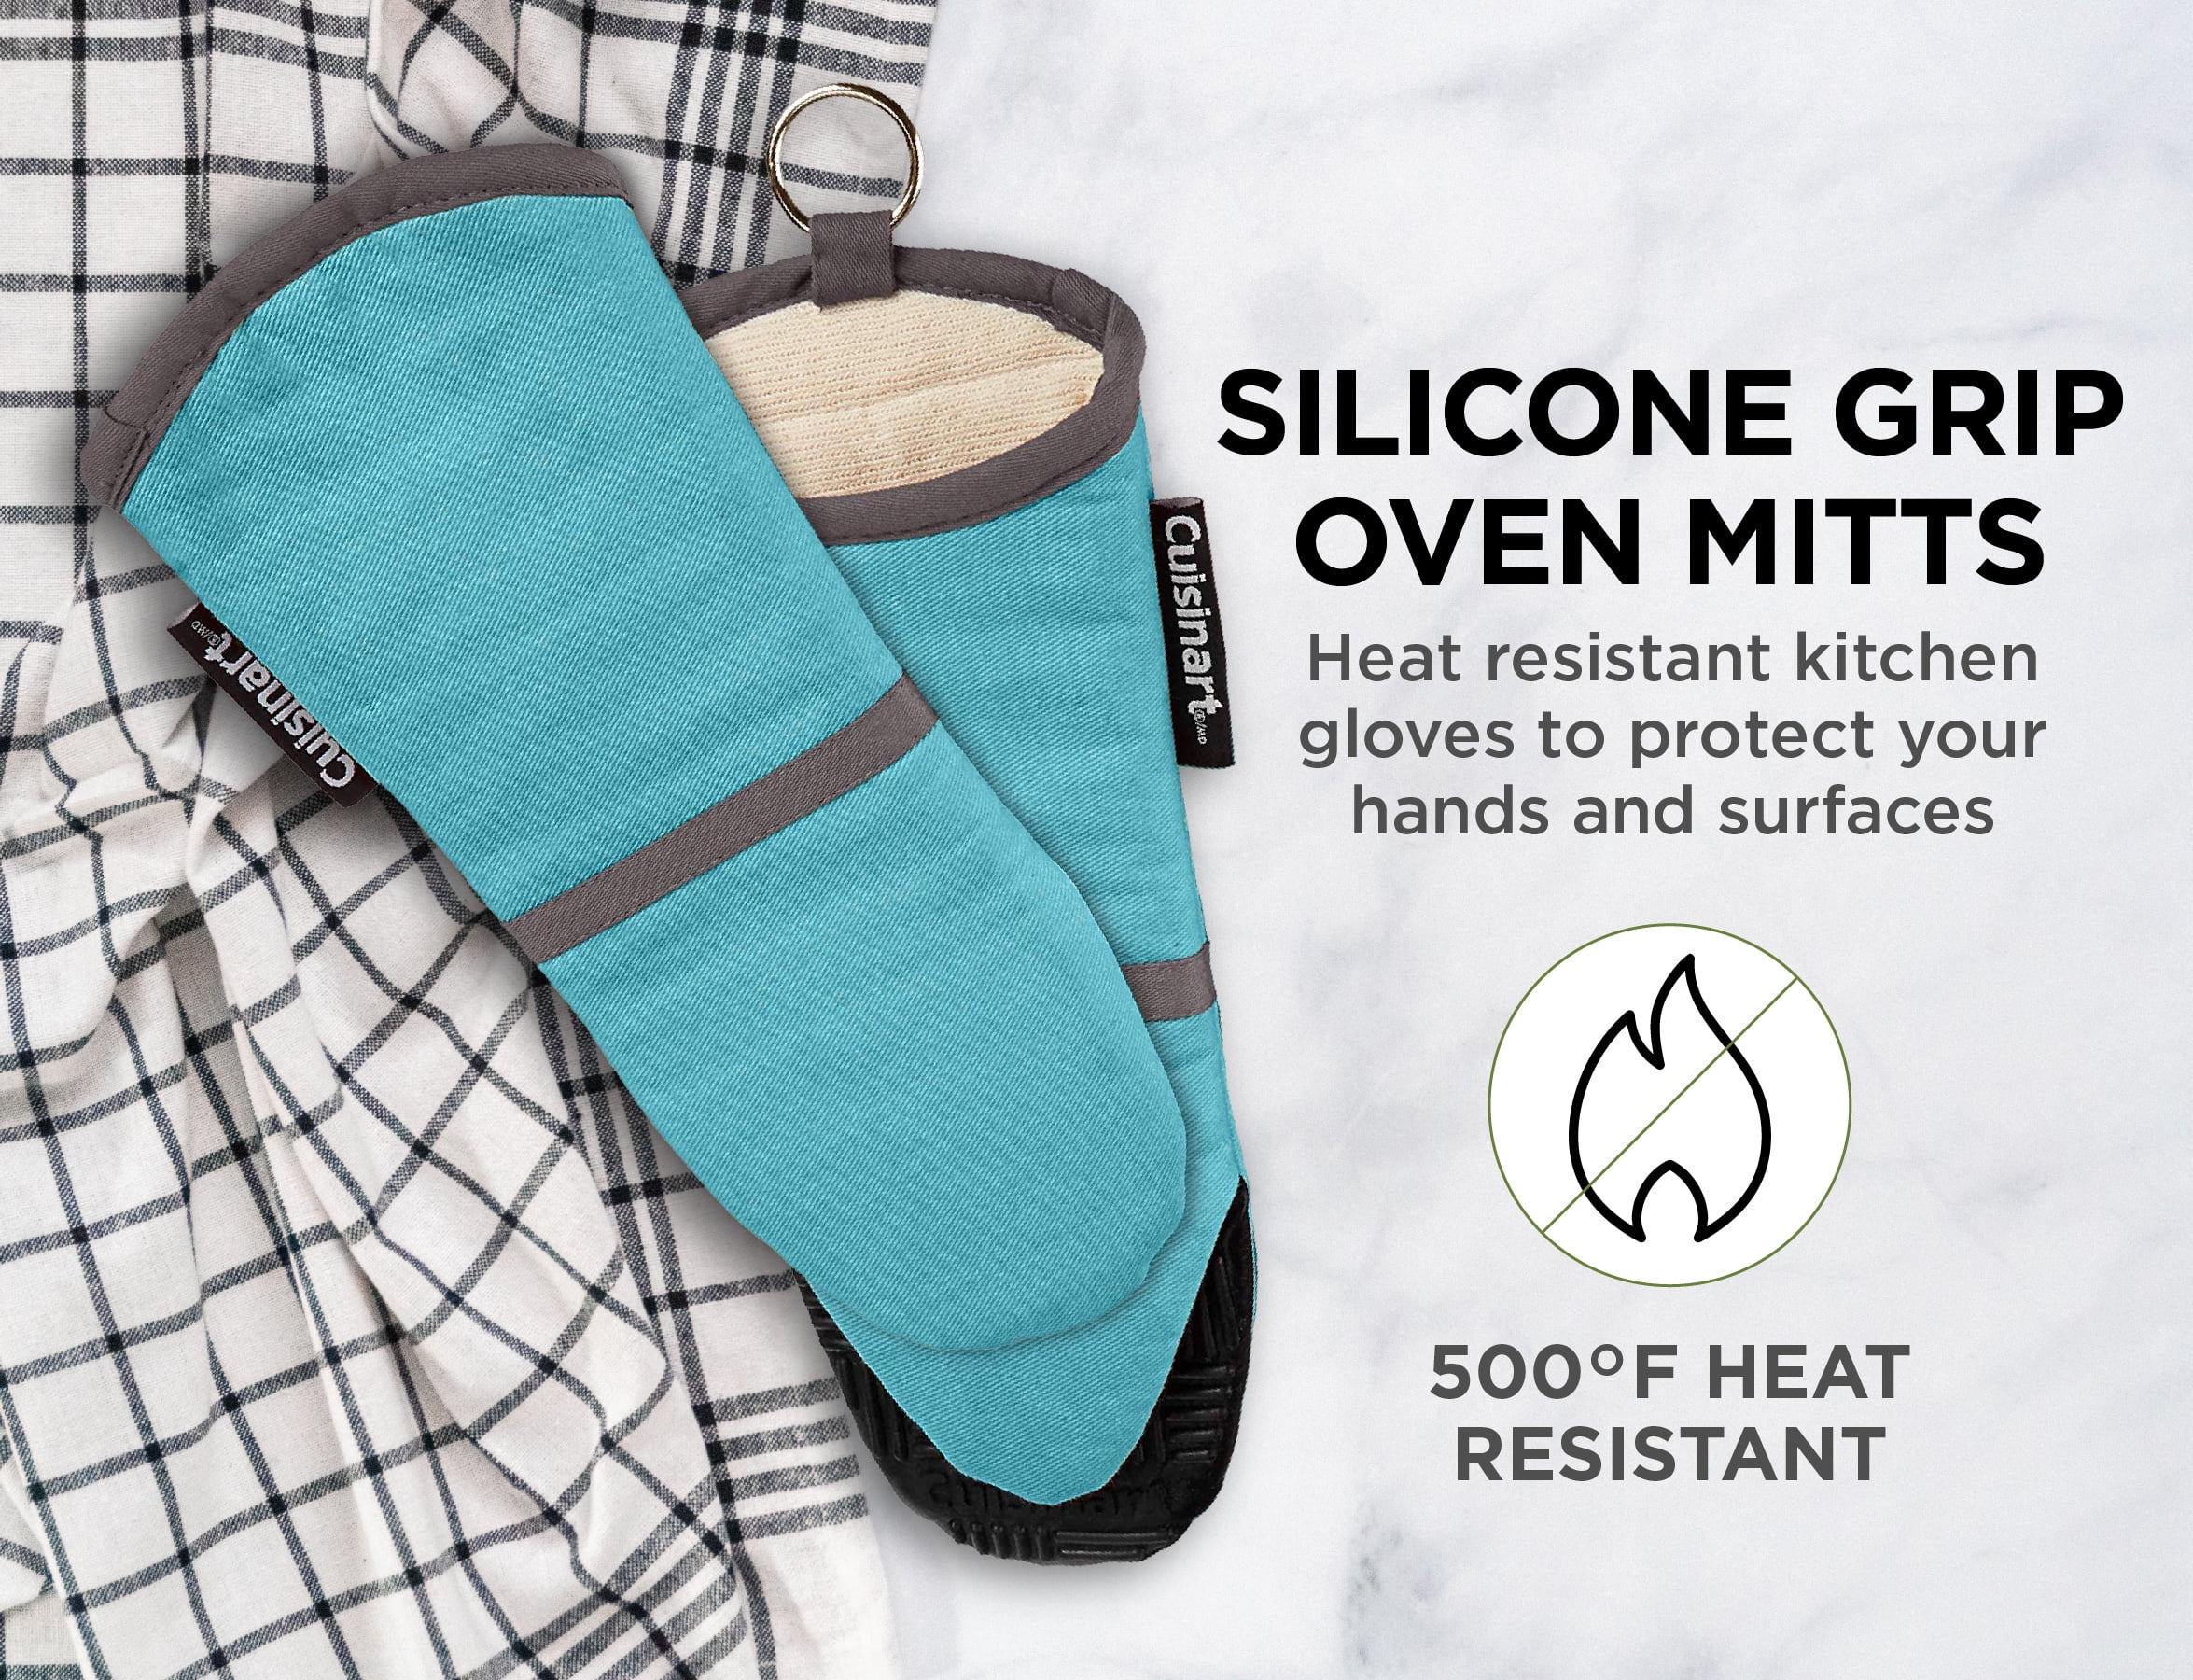 Pack of 2 Mitts Soft Insulated Deep Pockets Green Cuisinart Silicone Oven Mitts / Gloves Non-Slip Grip and Convenient Hanging Loop Heat Resistant Handle Hot Oven / Cooking Items Safely 